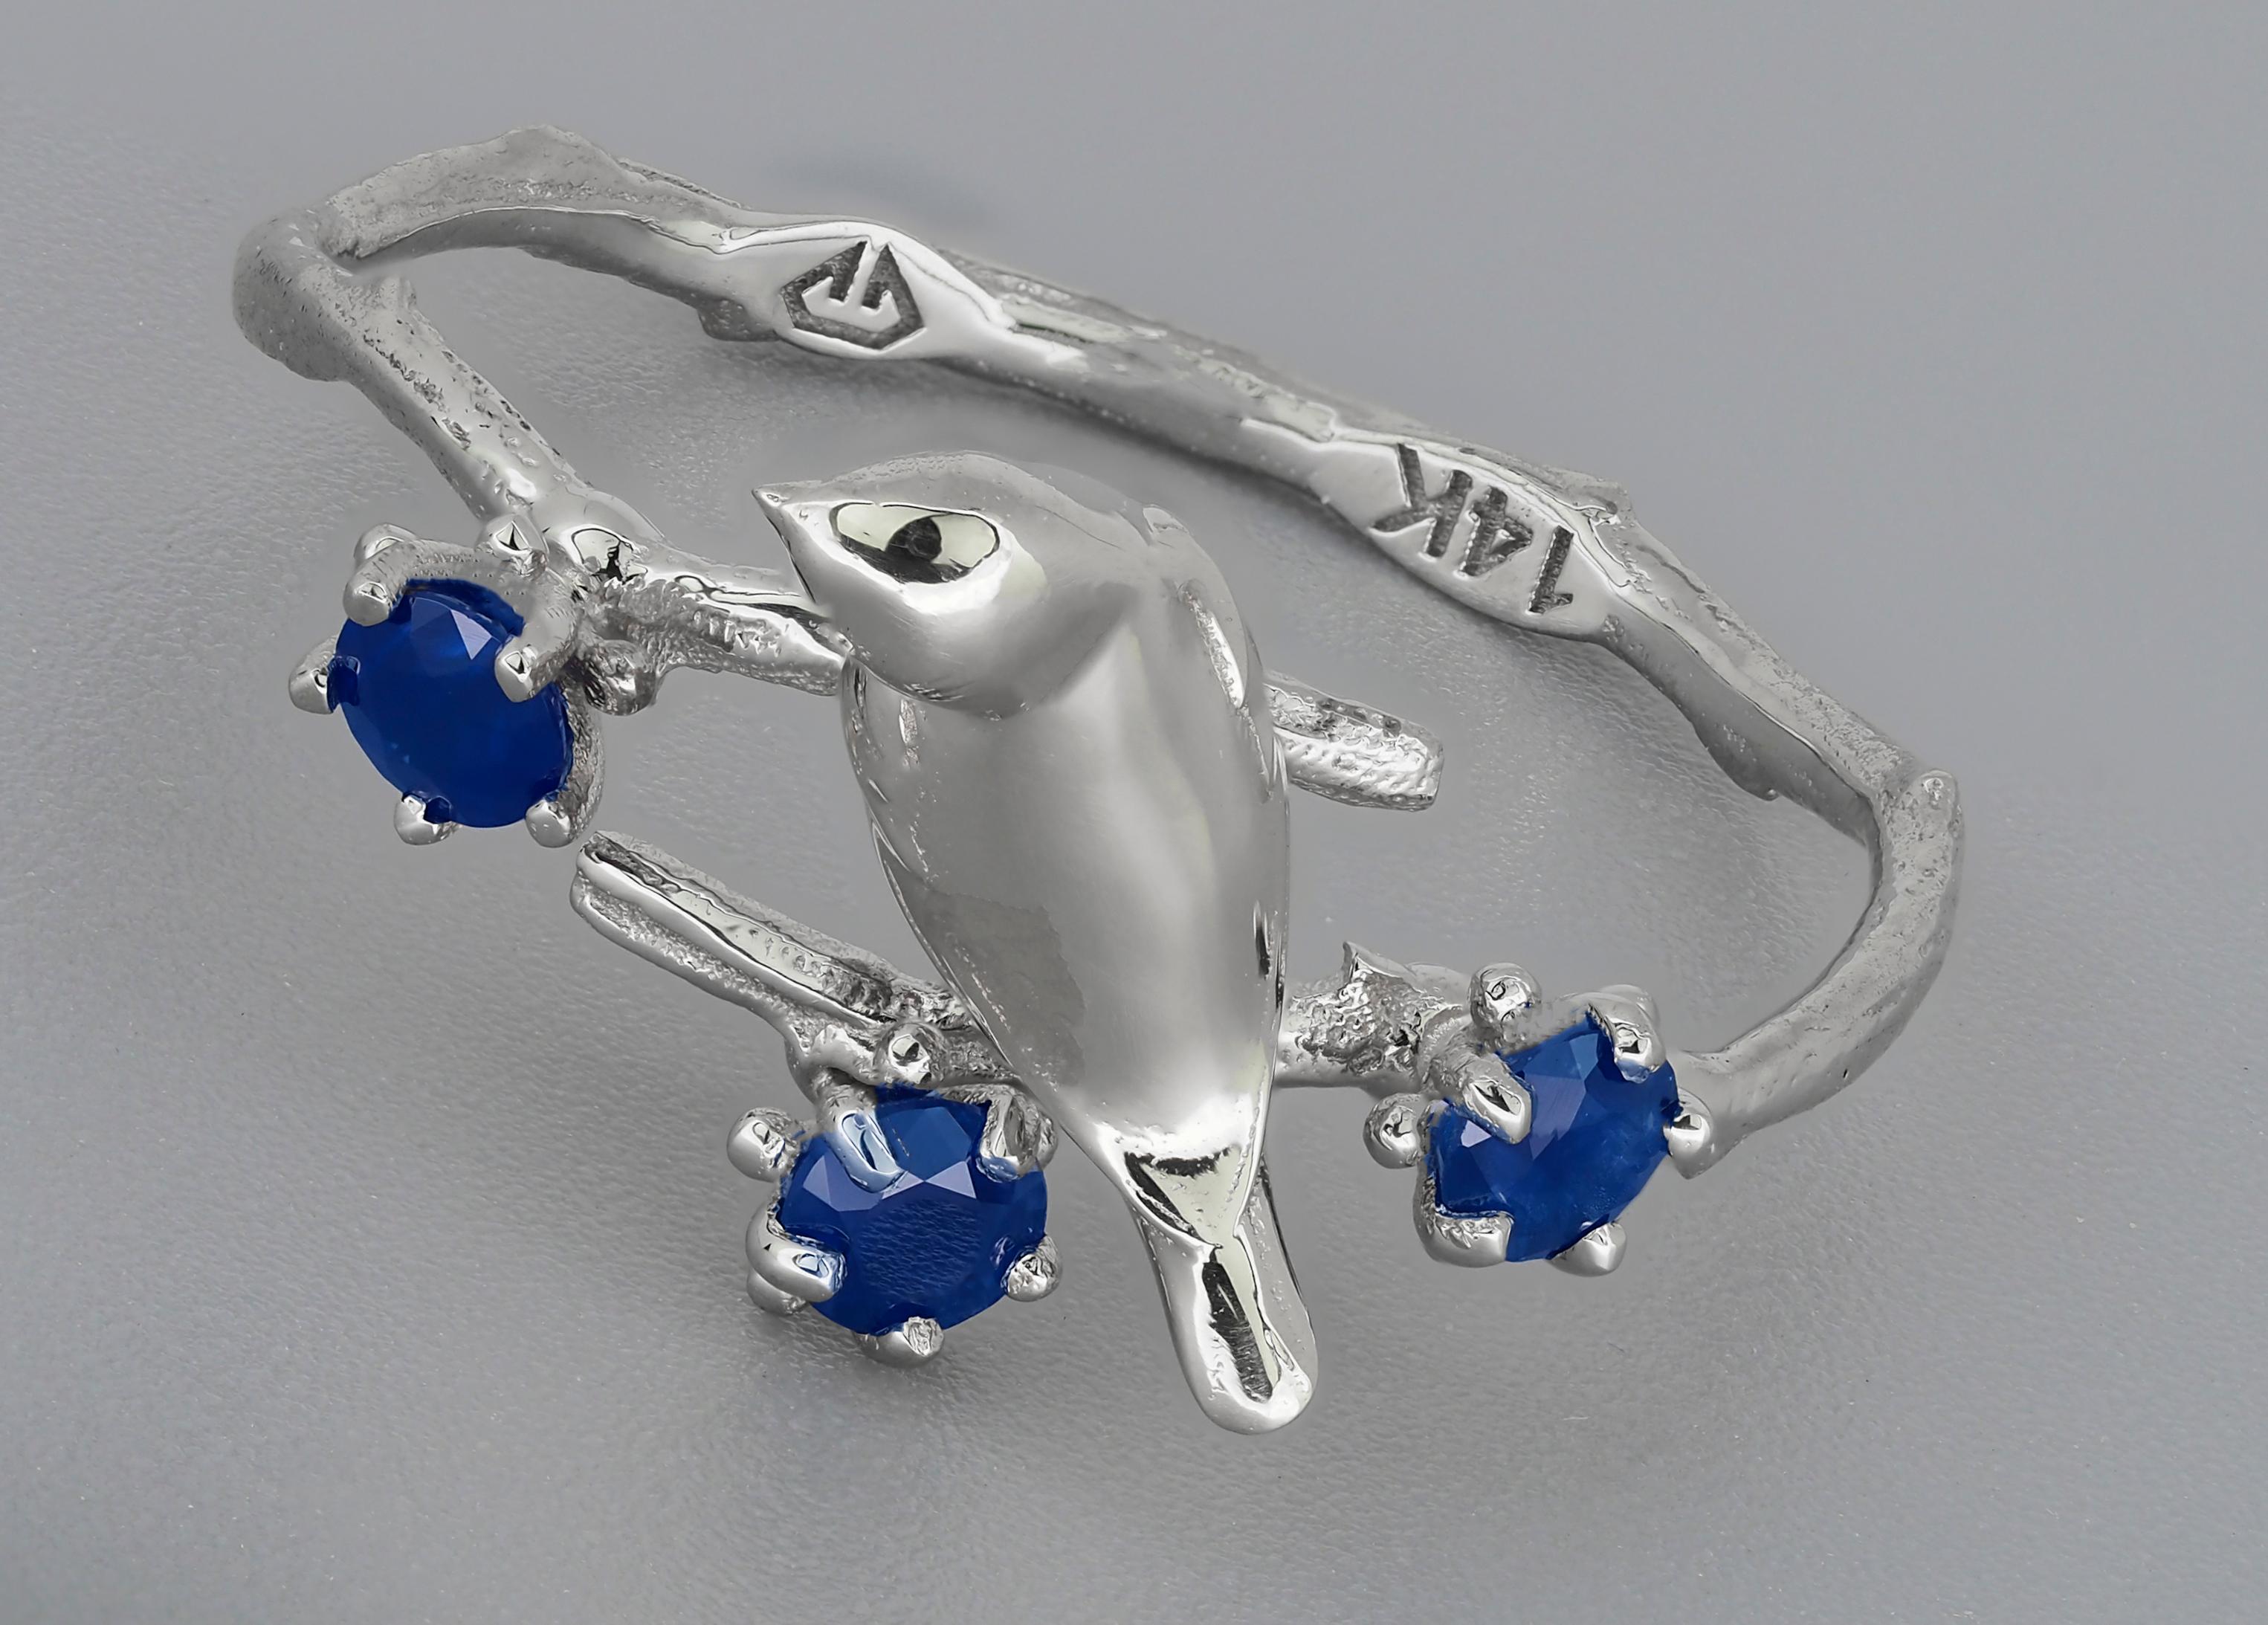 Bird on branch 14k gold ring. 
Bird on twig ring. Blue sapphire ring. Floral gold ring. September birthstone ring. Round sapphire ring.

Metal^ 14k gold
Weight: 1.75 g. depends from size.
Bird size - 11.2x4 mm.

Set with 3 sapphires, color -